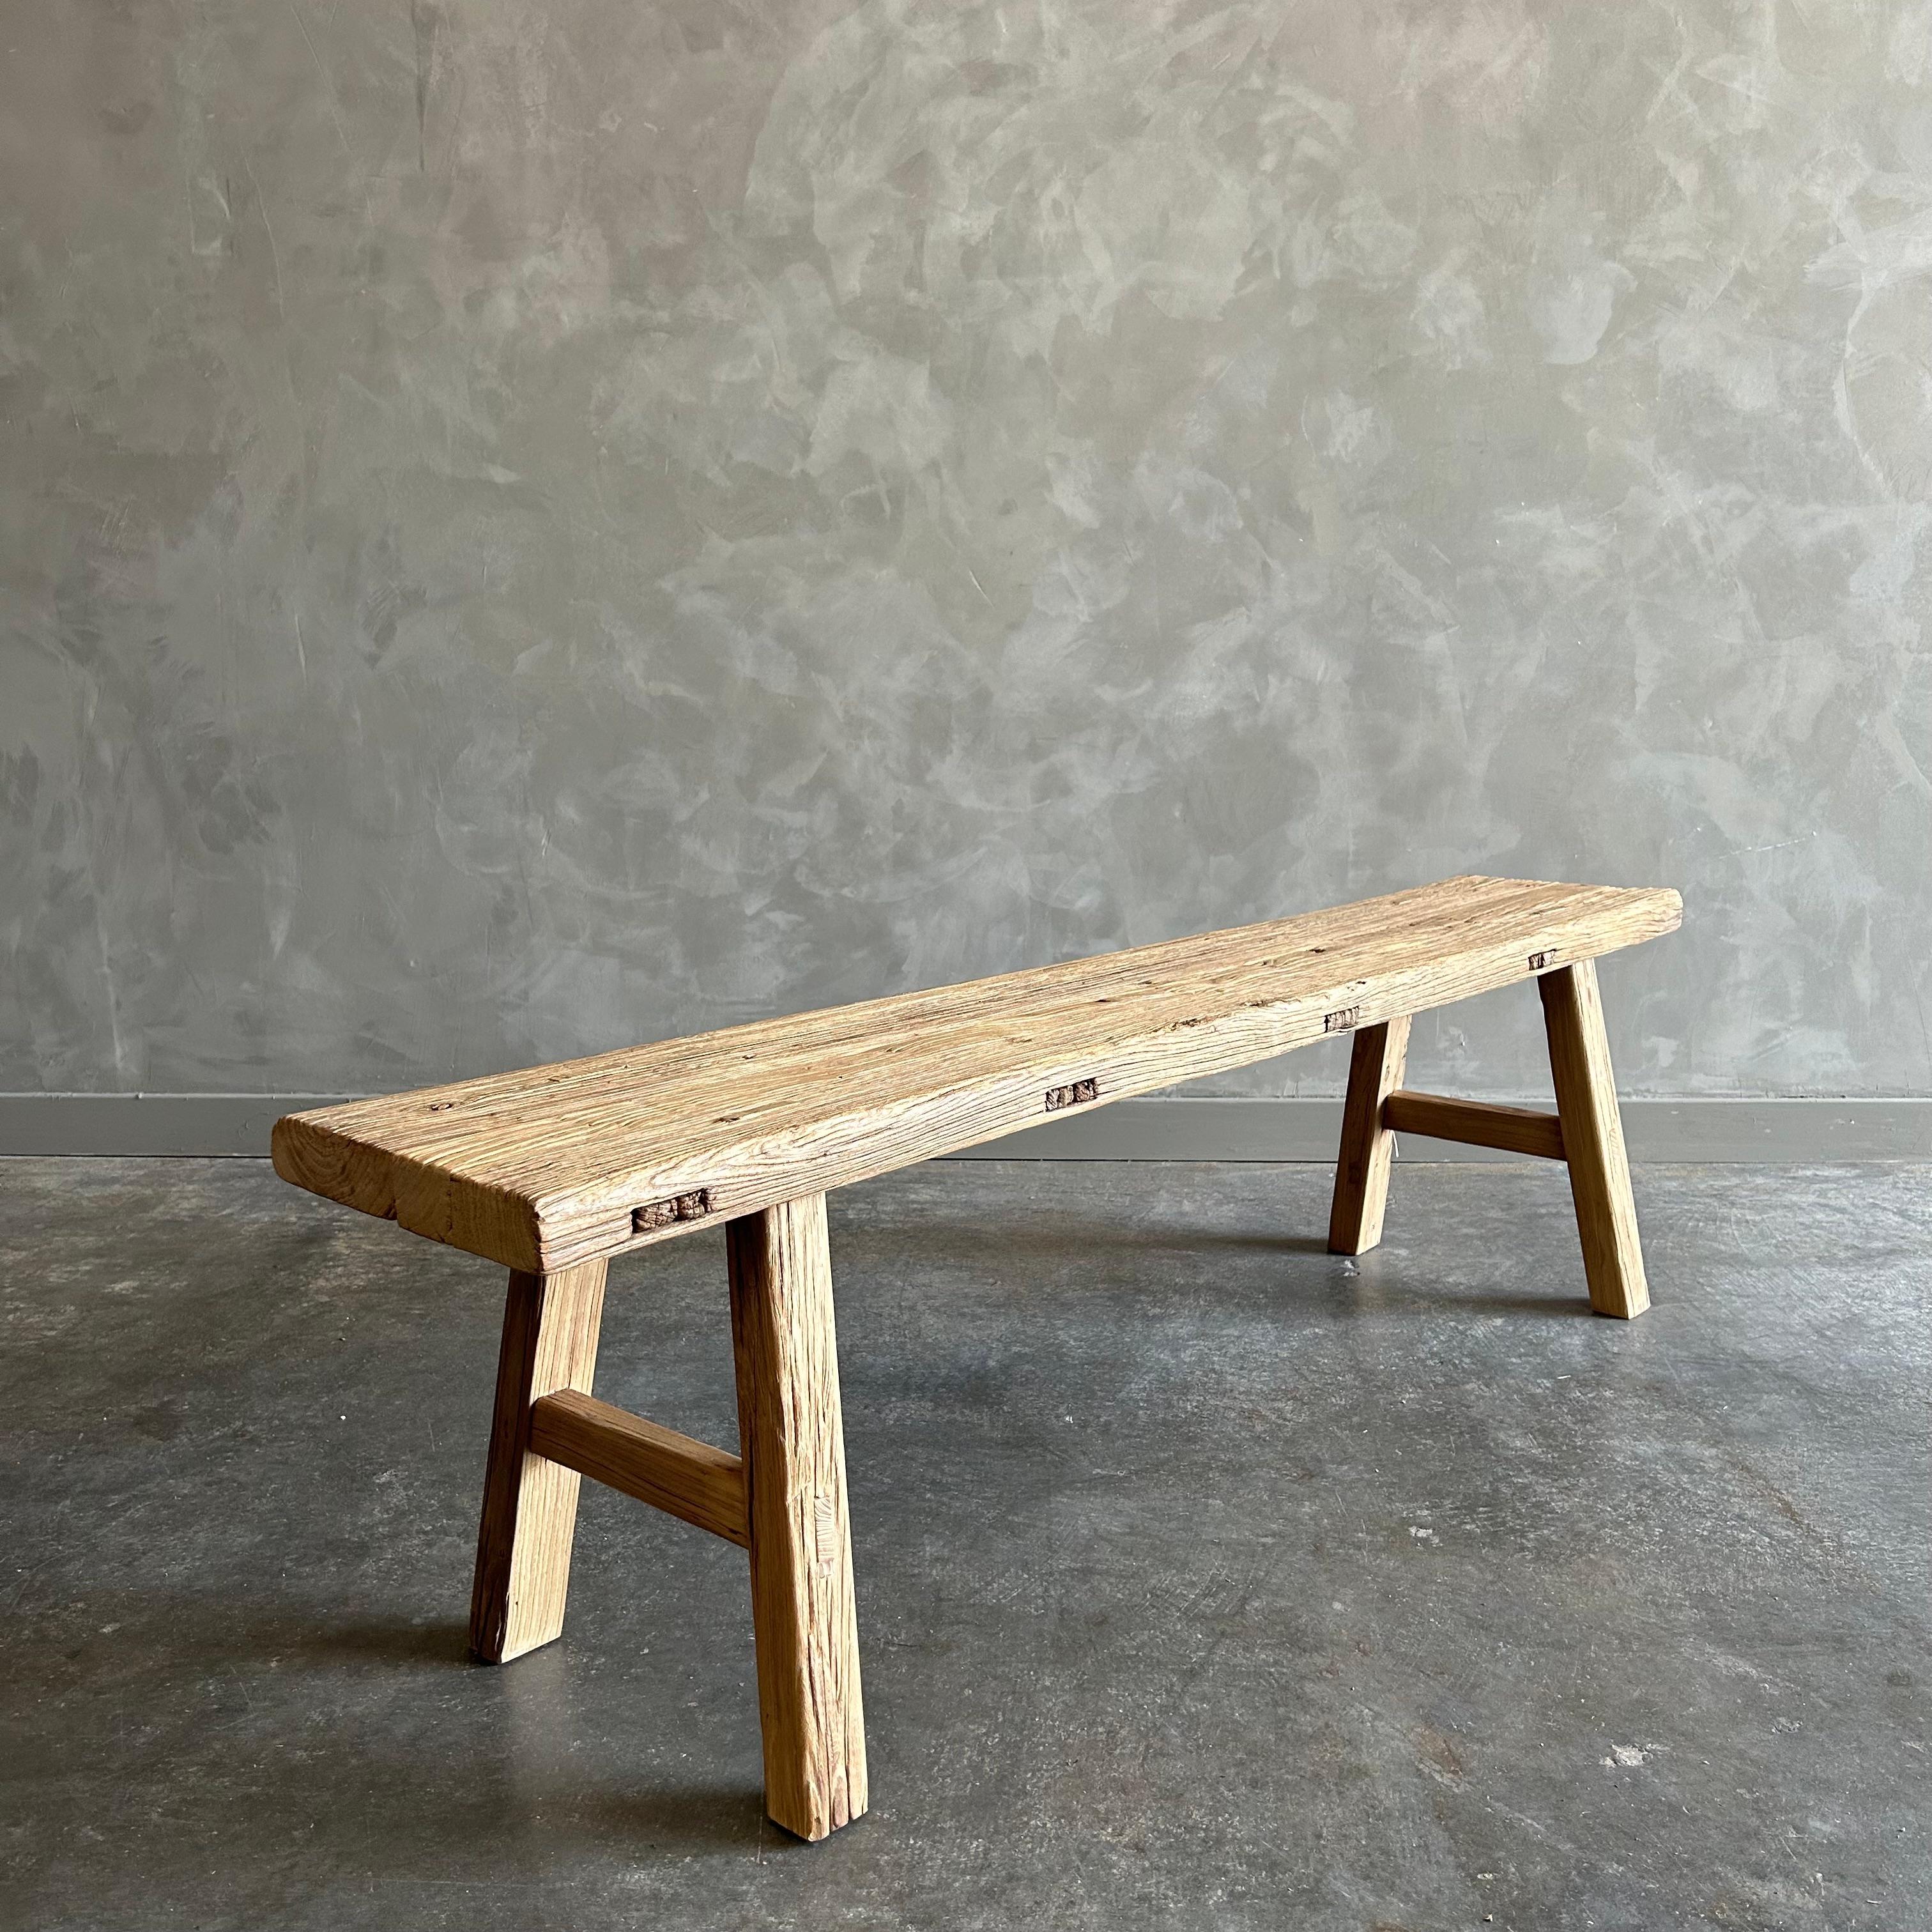 Reclaimed vintage elmwood wide seat bench
Vintage reclaimed elmwood benches! Beautiful antique patina, with weathering and age, these are solid and sturdy ready for daily use, use as a table behind a sofa, stool, coffee table, they are great for any